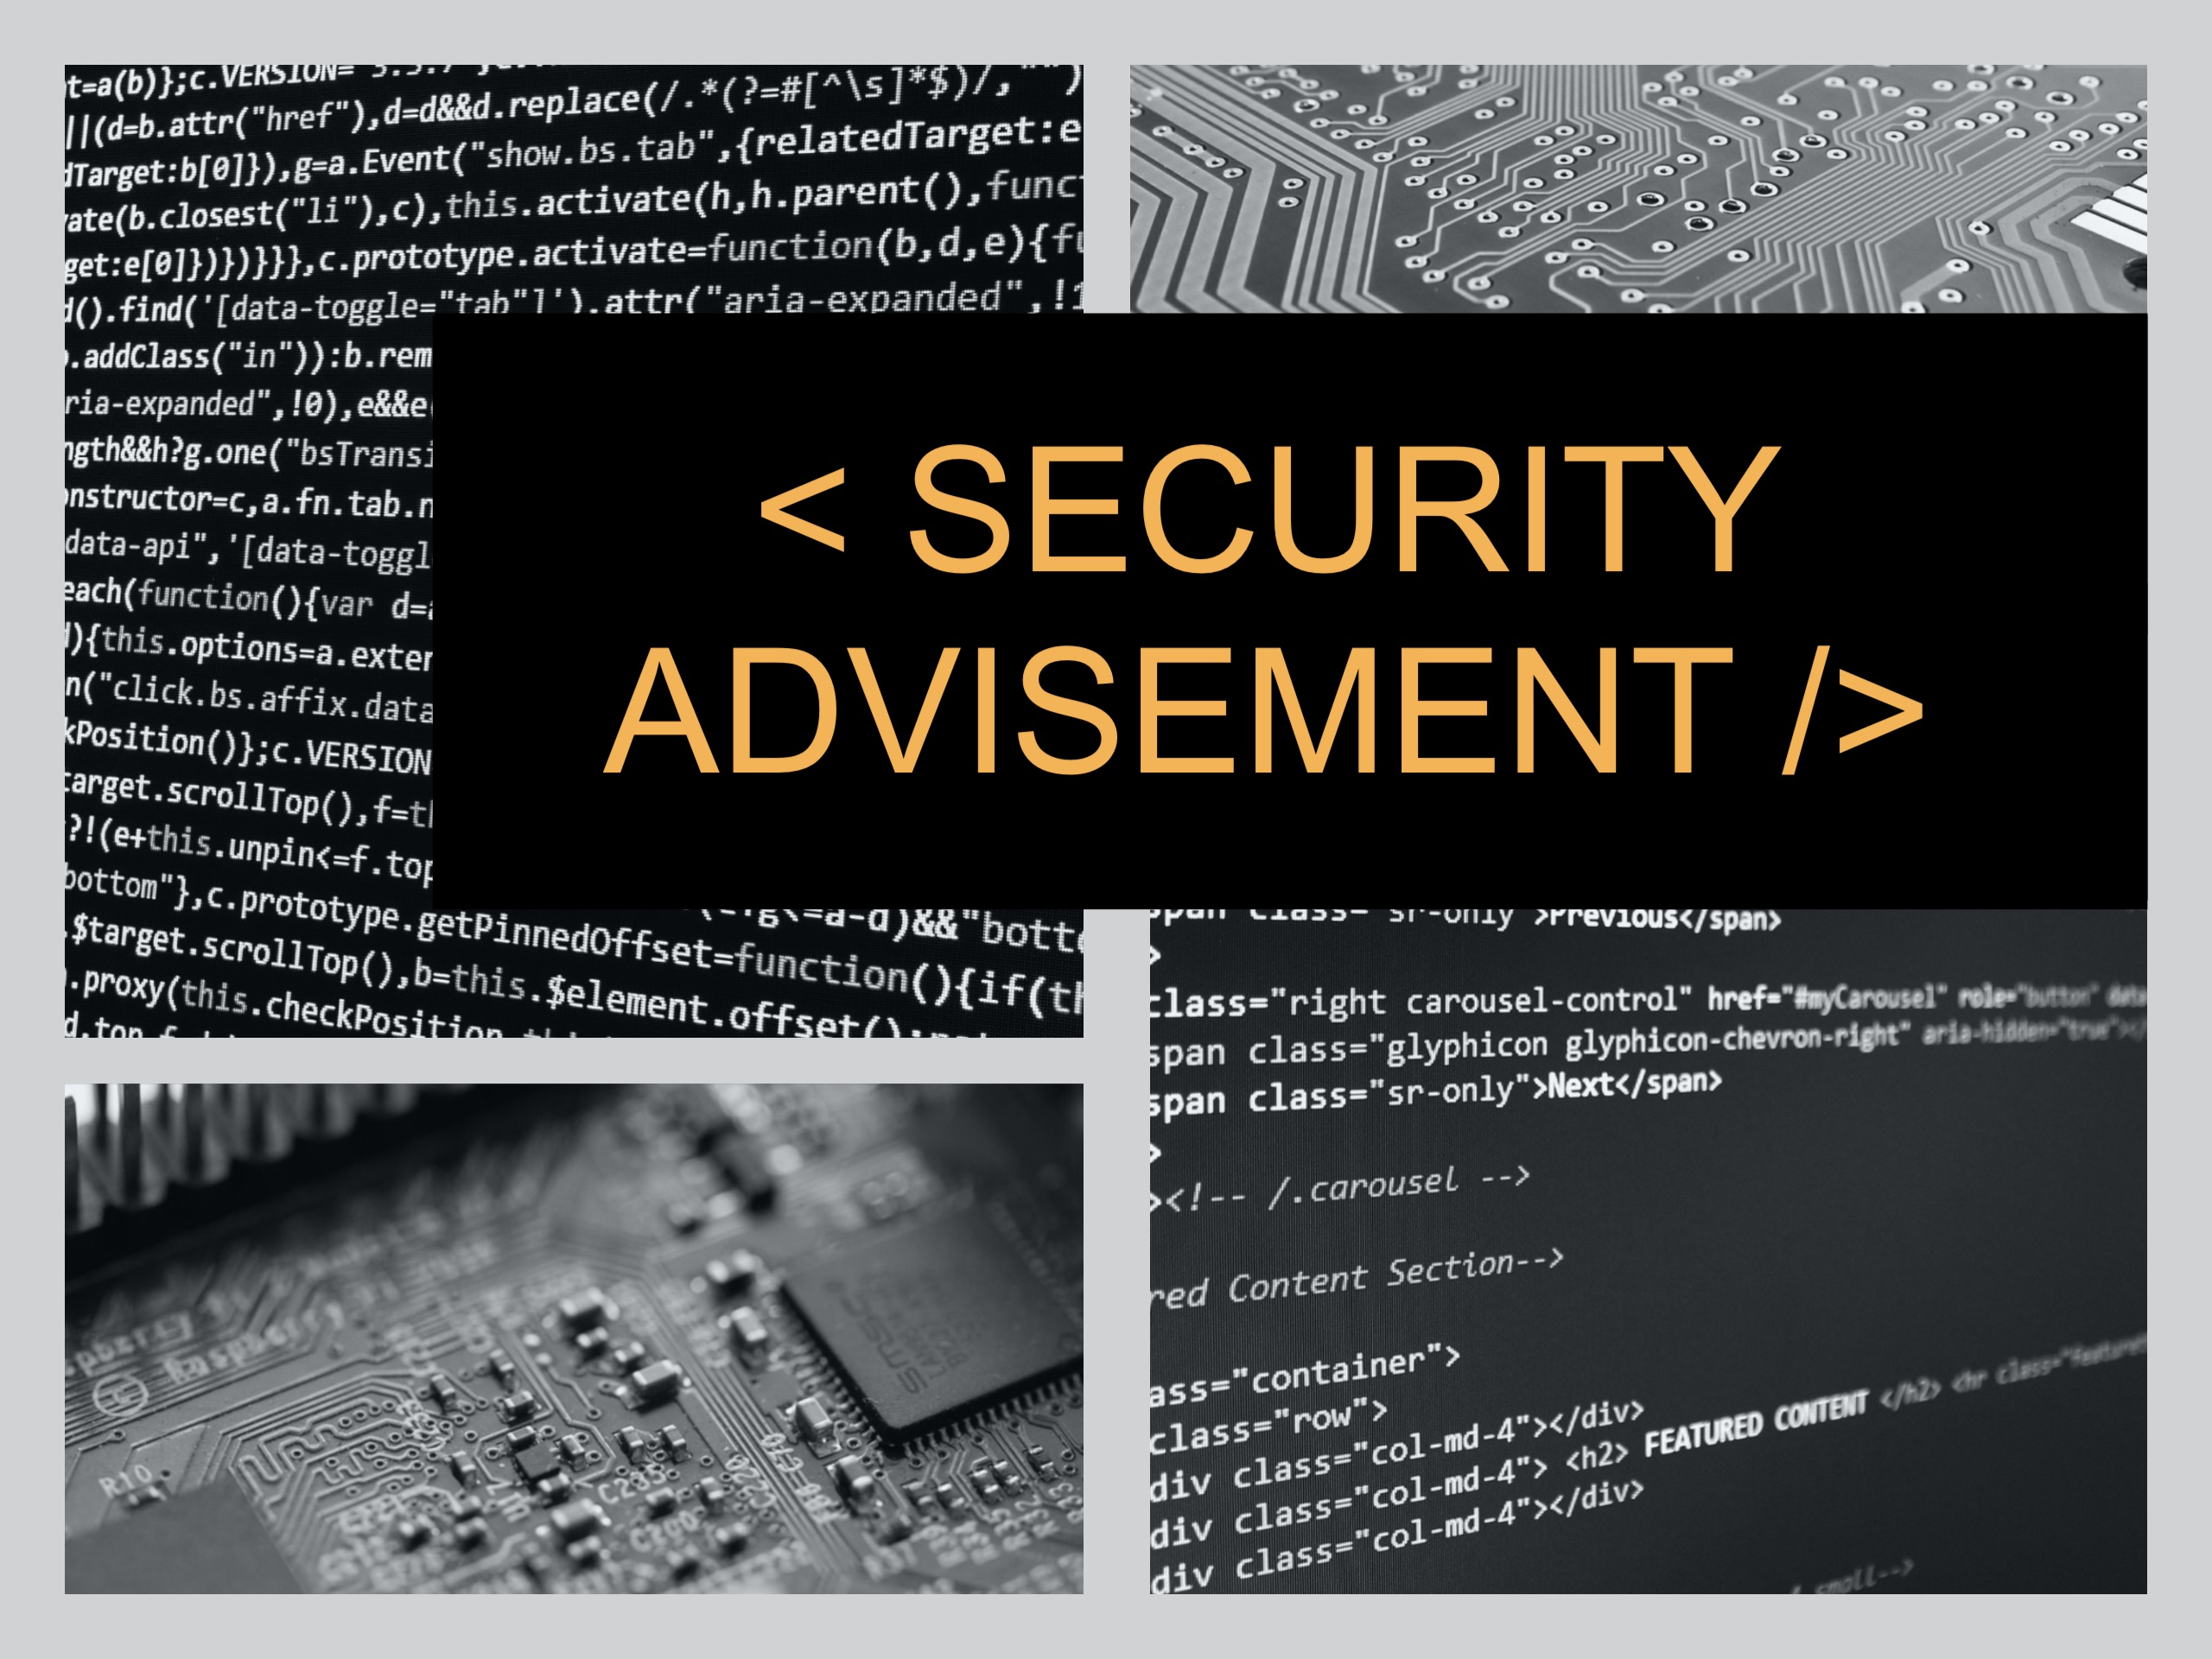 Security Advisement by Security Engineers